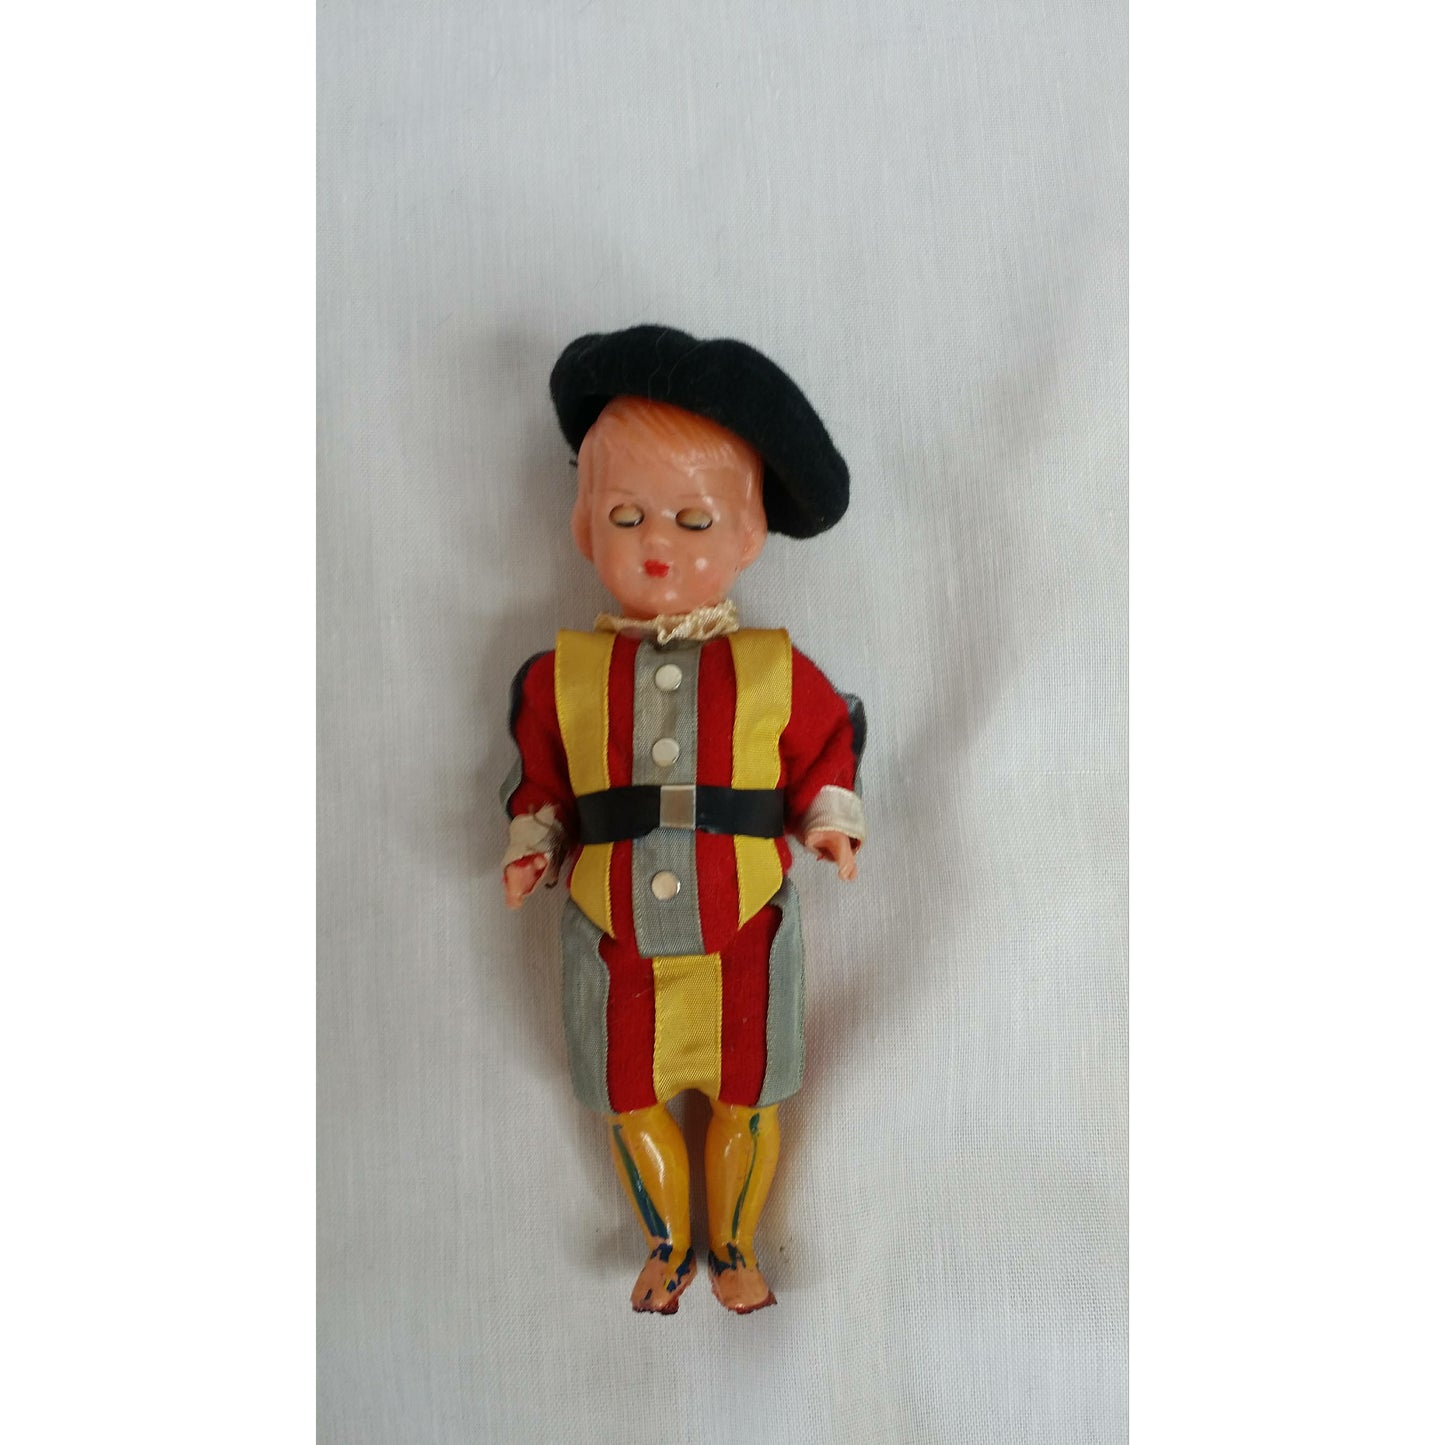 Vatican Guard ~ Hard Plastic Vintage 1950s 6" Inch Celluloid Boy Doll ~ Jointed Arms & Legs ~ Painted Legs ~ Sleepy Eyes